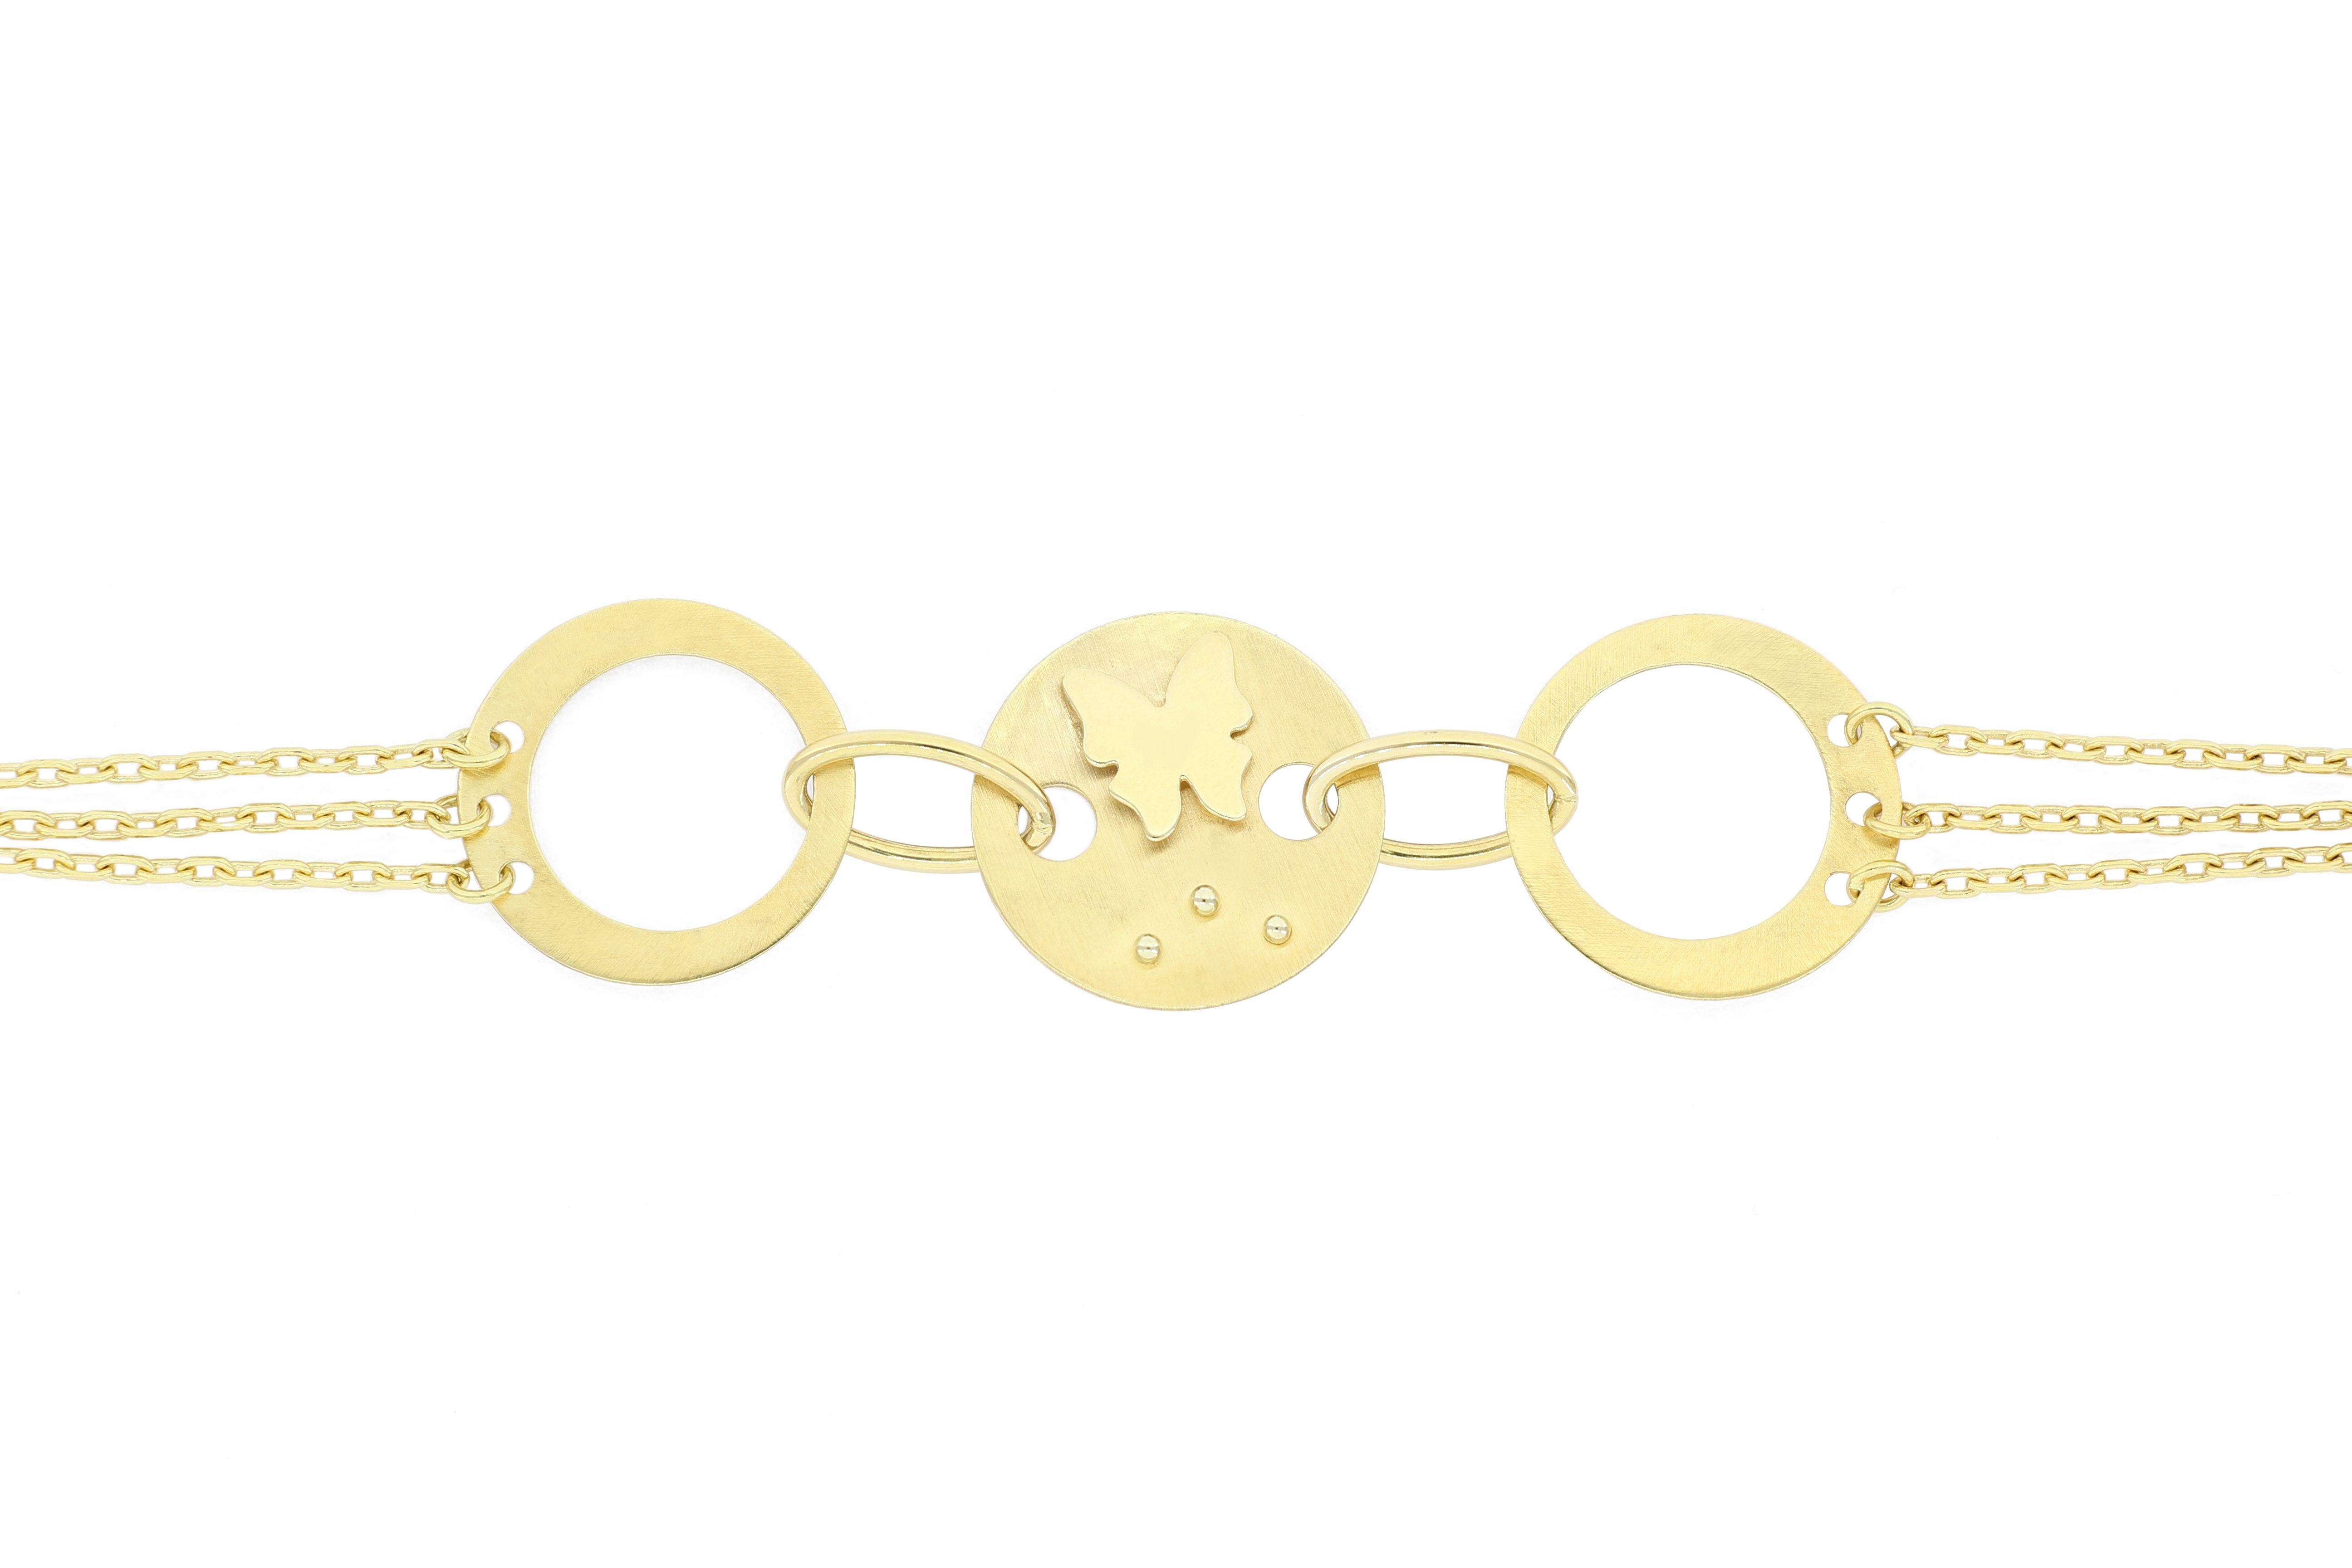 A stylish 18 Karat gold bracelet, designed and made in Italy, with fabulous craftsmanship,  fashionable and unique.
The company was founded one and a half centuries ago in Macau. The brand is renowned for its high jewellery collections with fabulous